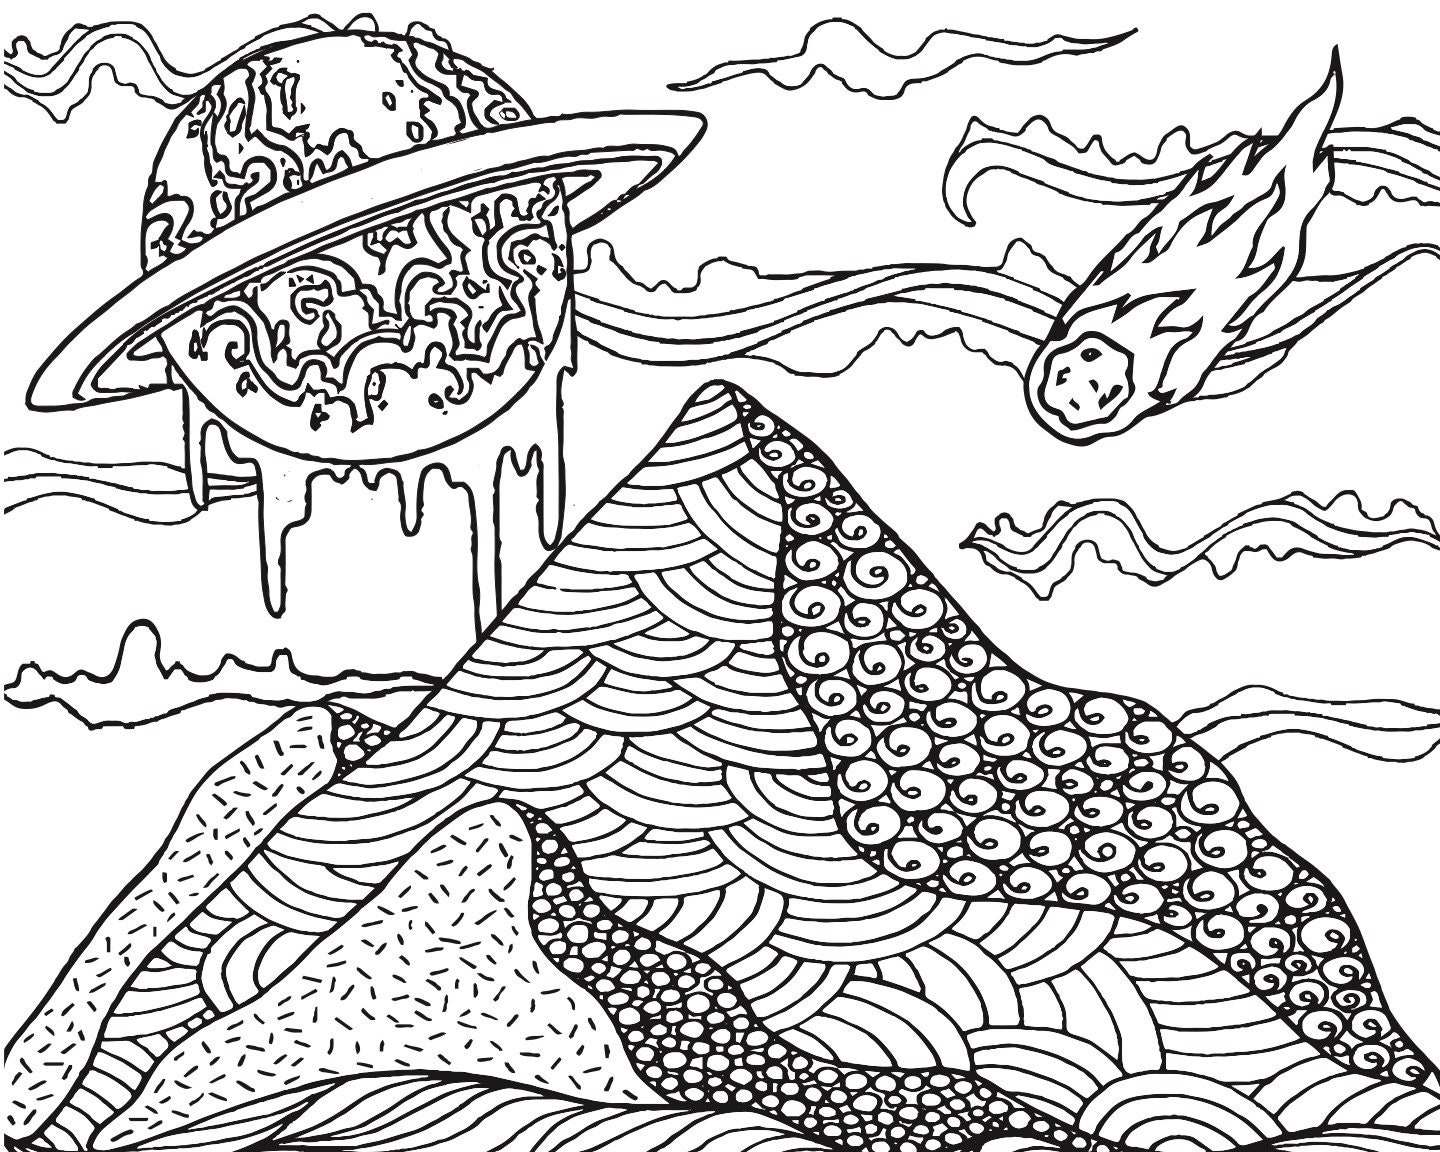 Mind Surfers Vol. 1: Psychedelic Coloring Pages for Adults